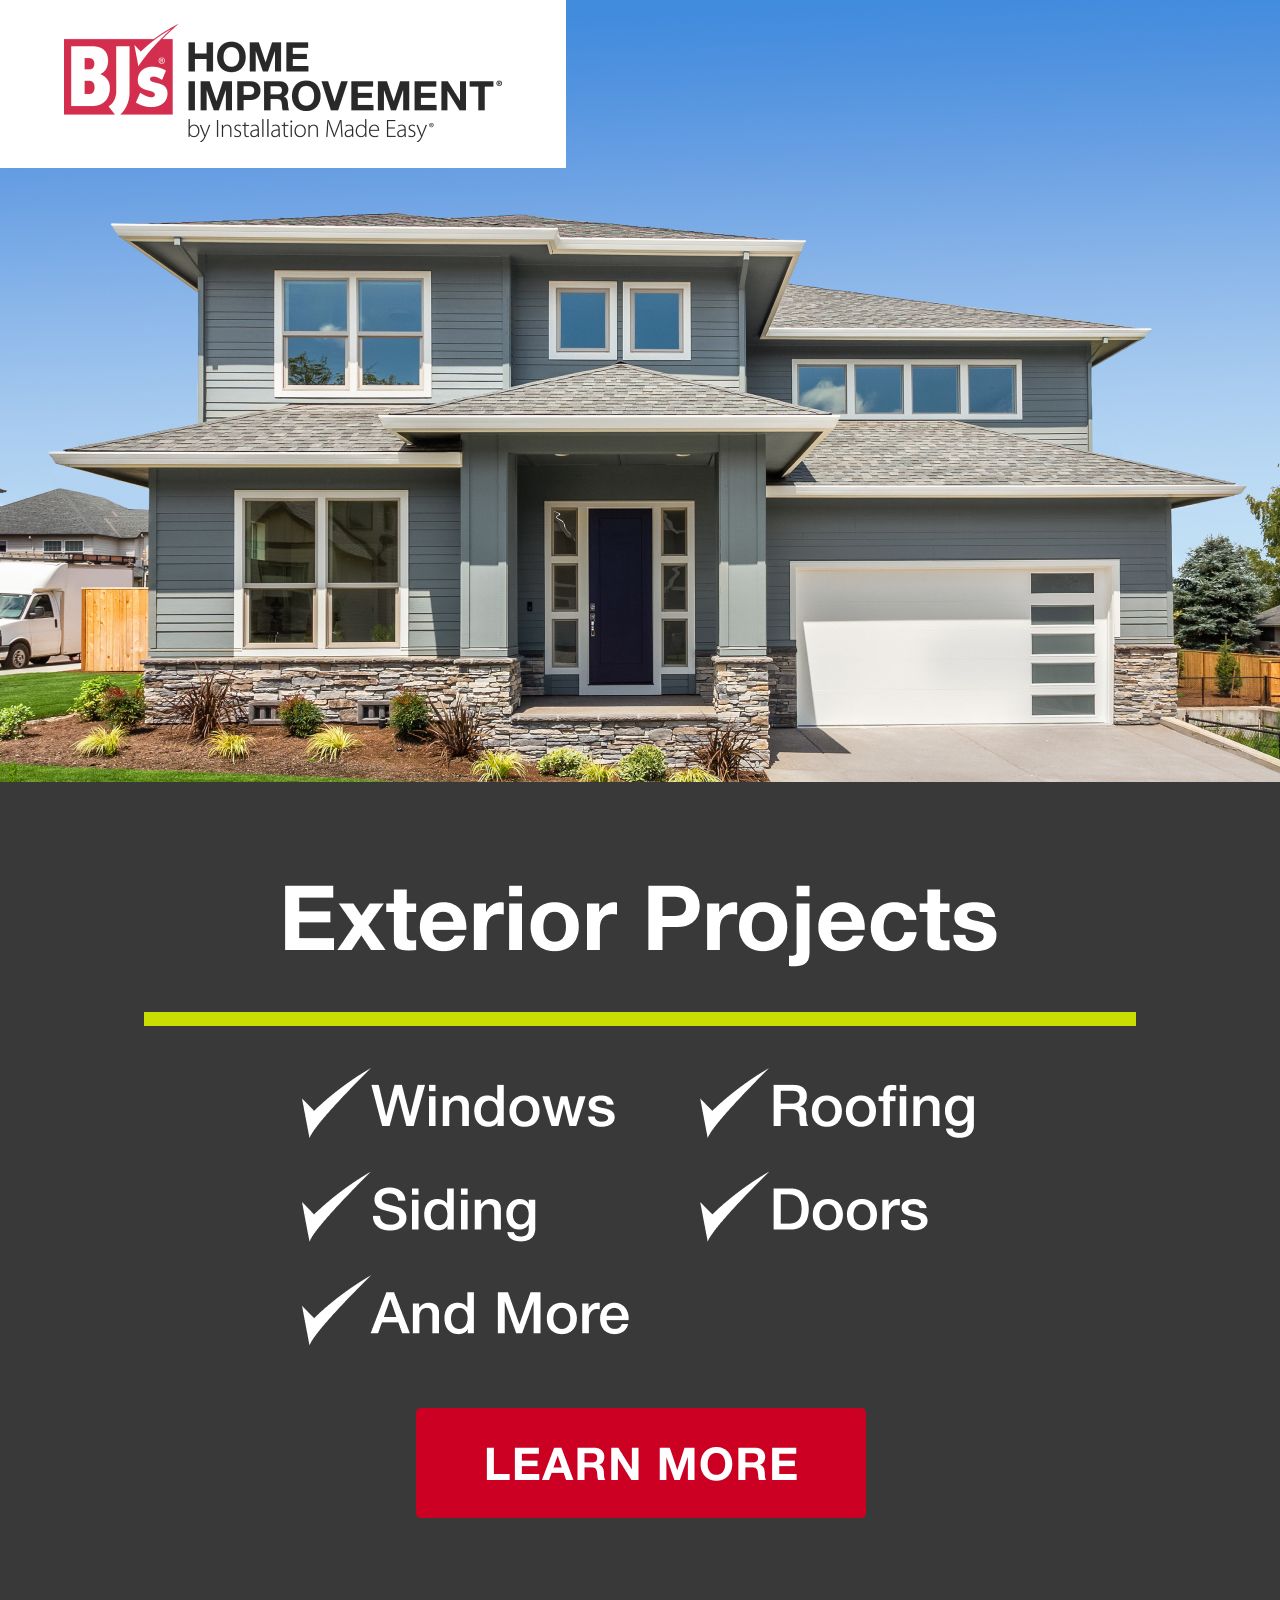 BJs home improvement. Exterior projects. Learn More